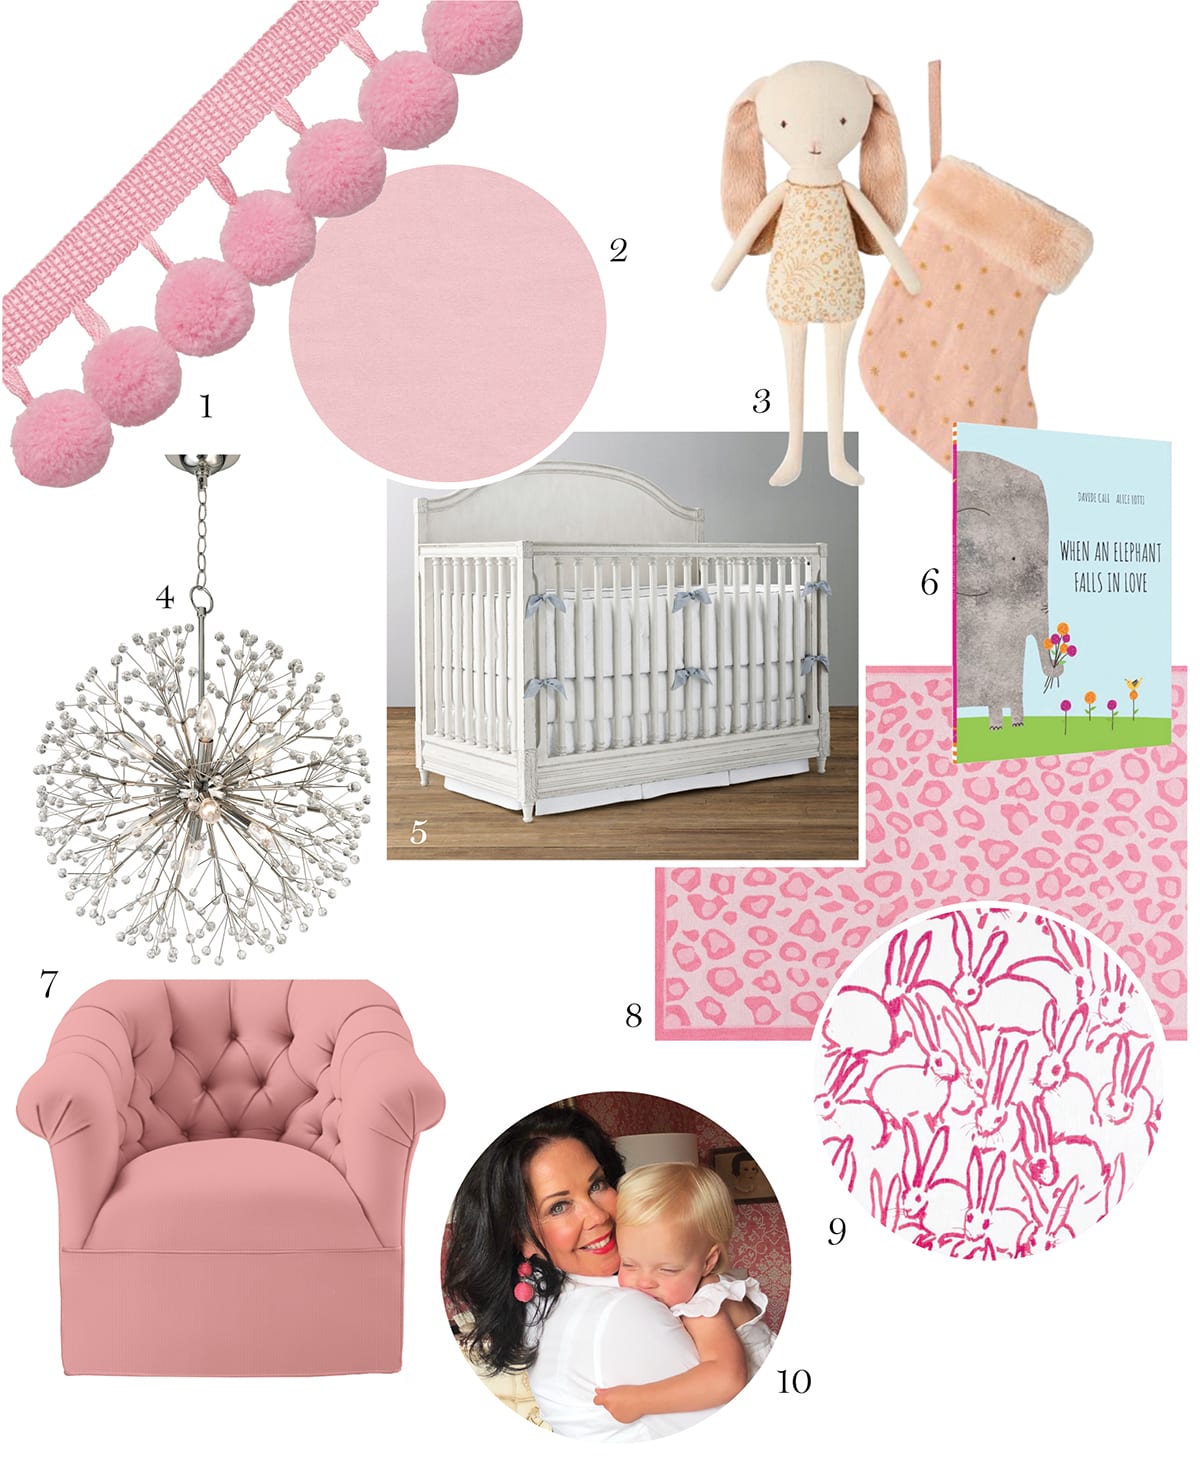 Pink items used in a children's nursery